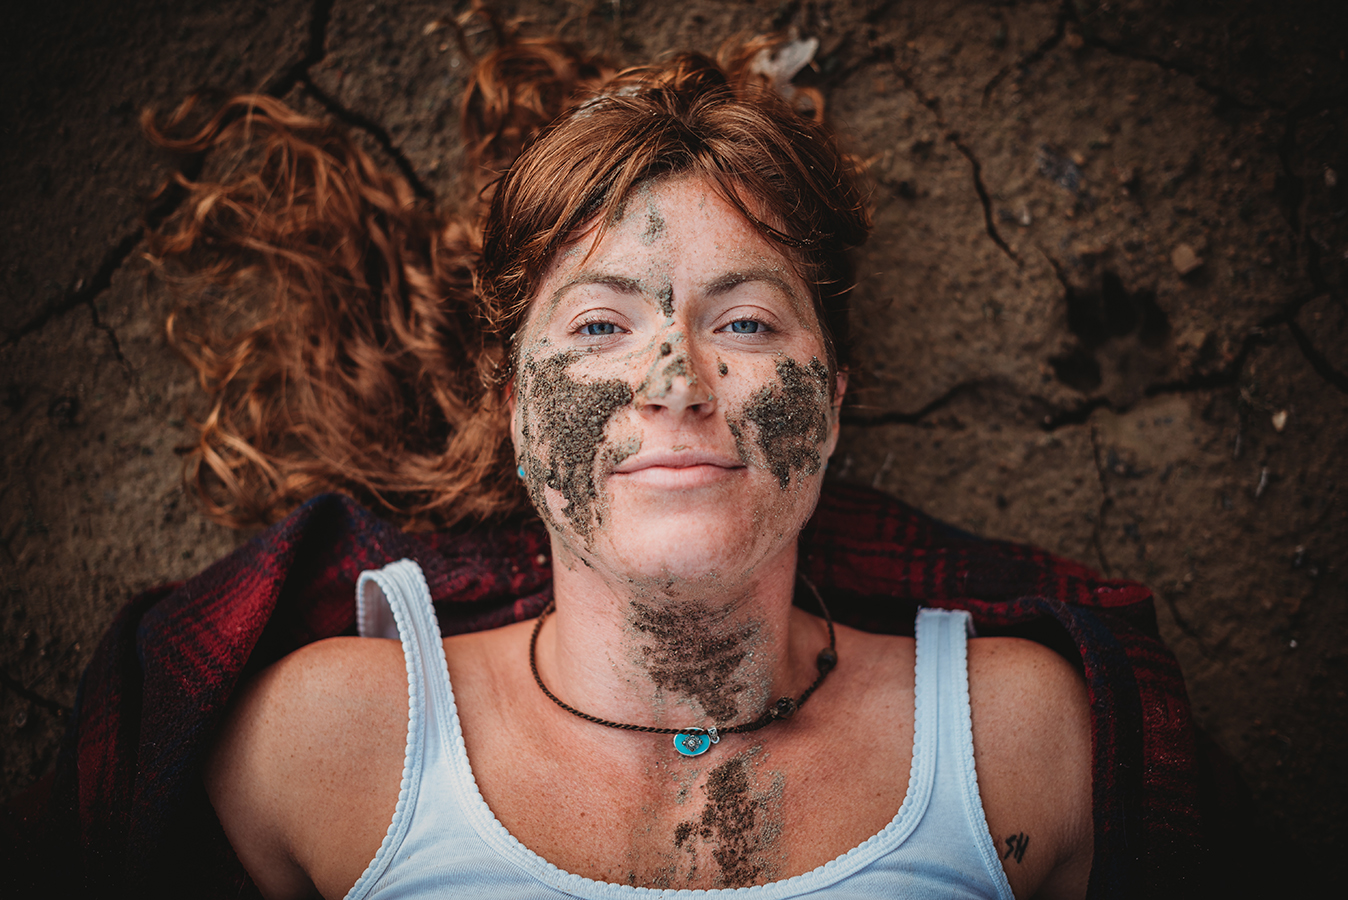 woman laying in mud smiling